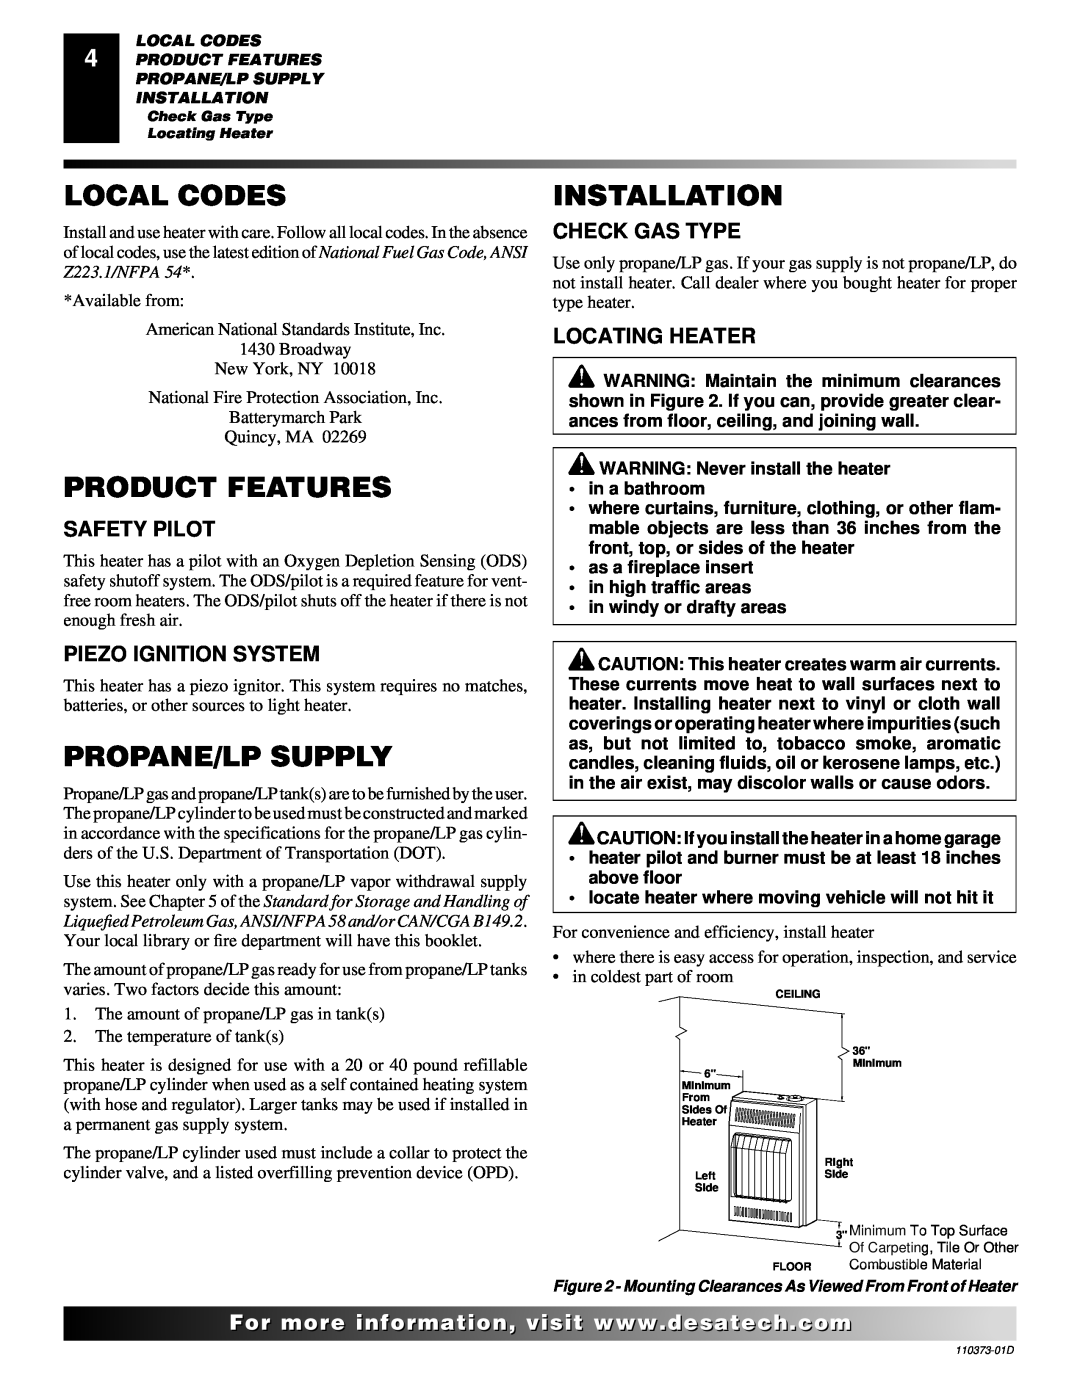 Desa REM10PT RH10PT installation manual Local Codes, Product Features, Propane/Lp Supply, Installation, For..com 